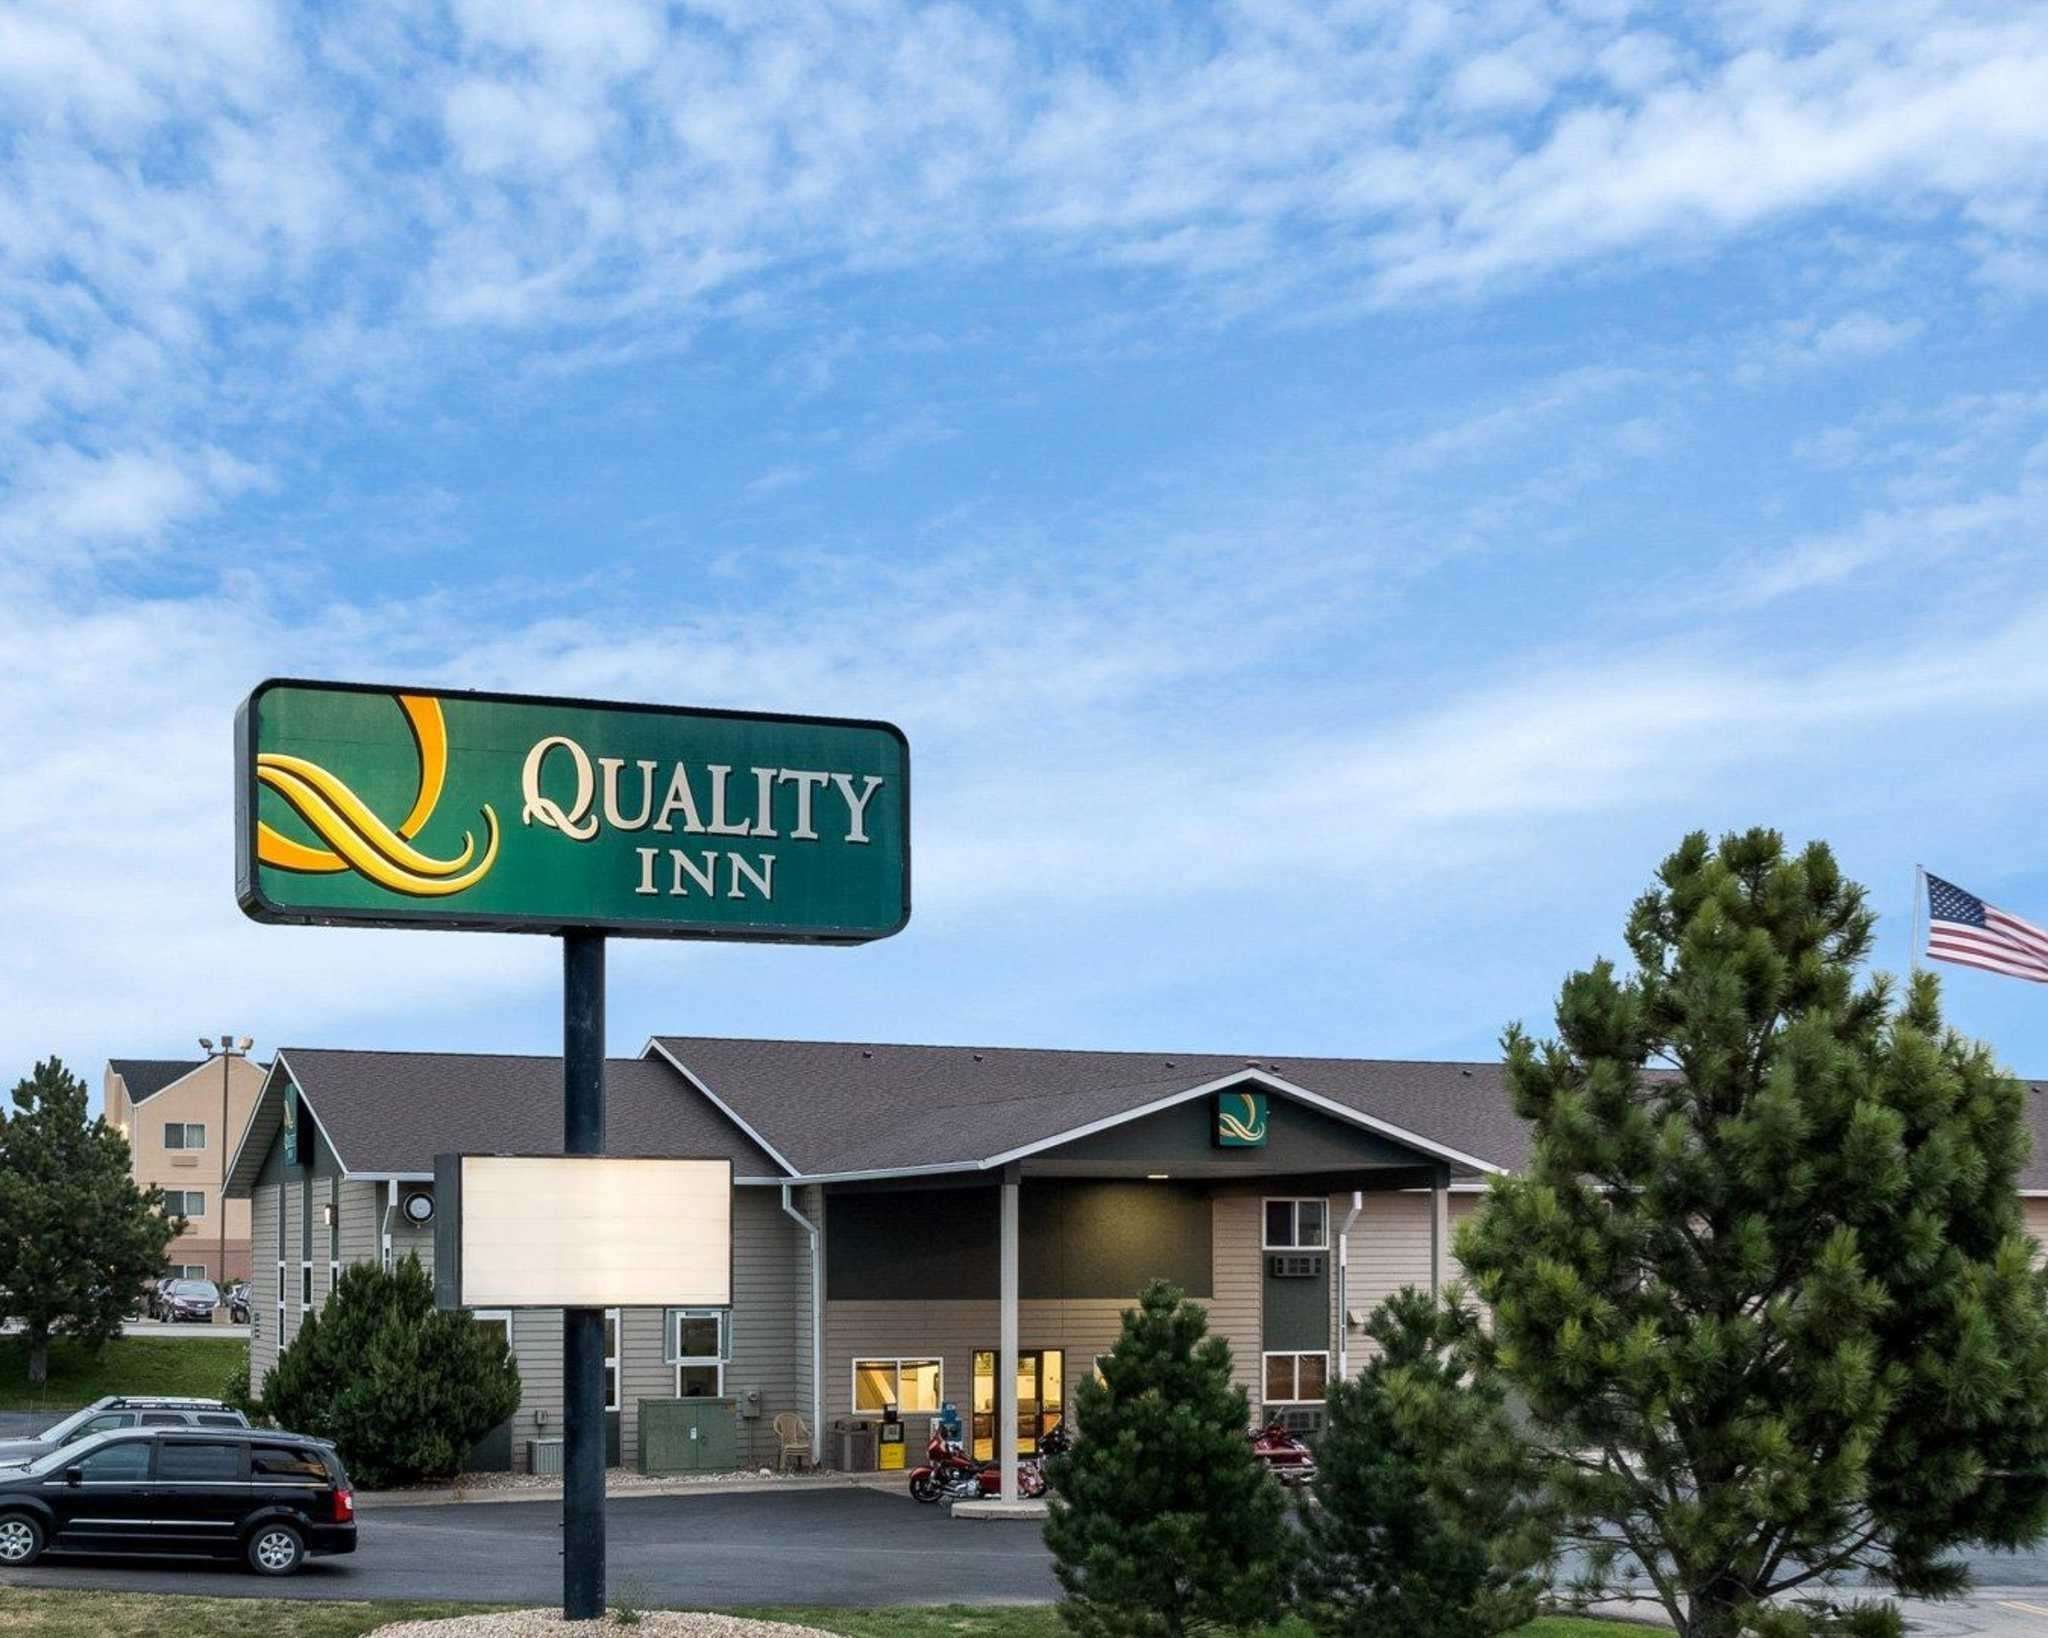 Quality Inn Coupons near me in Spearfish, SD 57783 8coupons